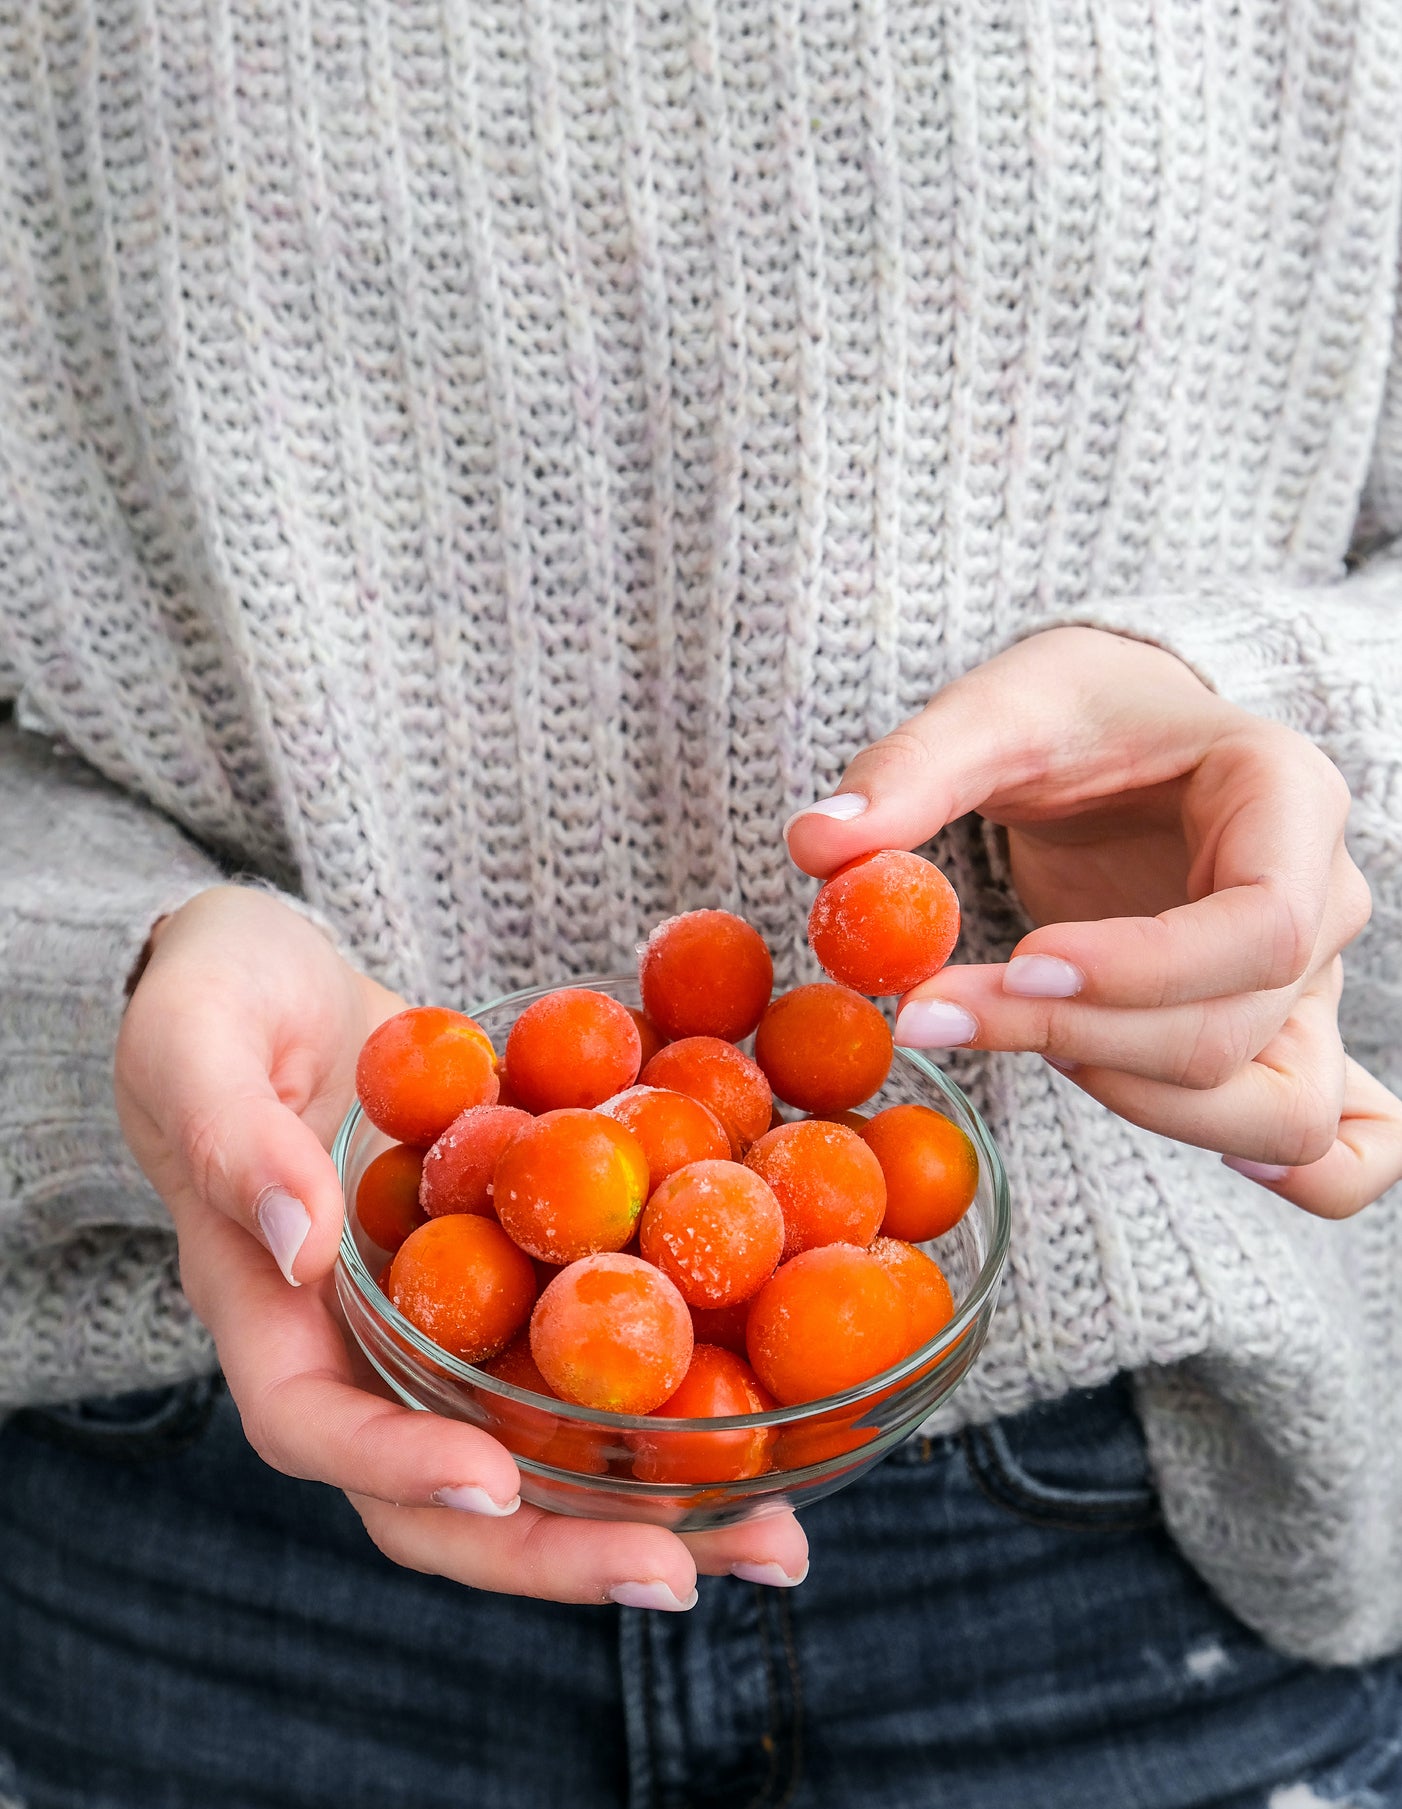 Frozen cherry tomatoes are like chilly marbles